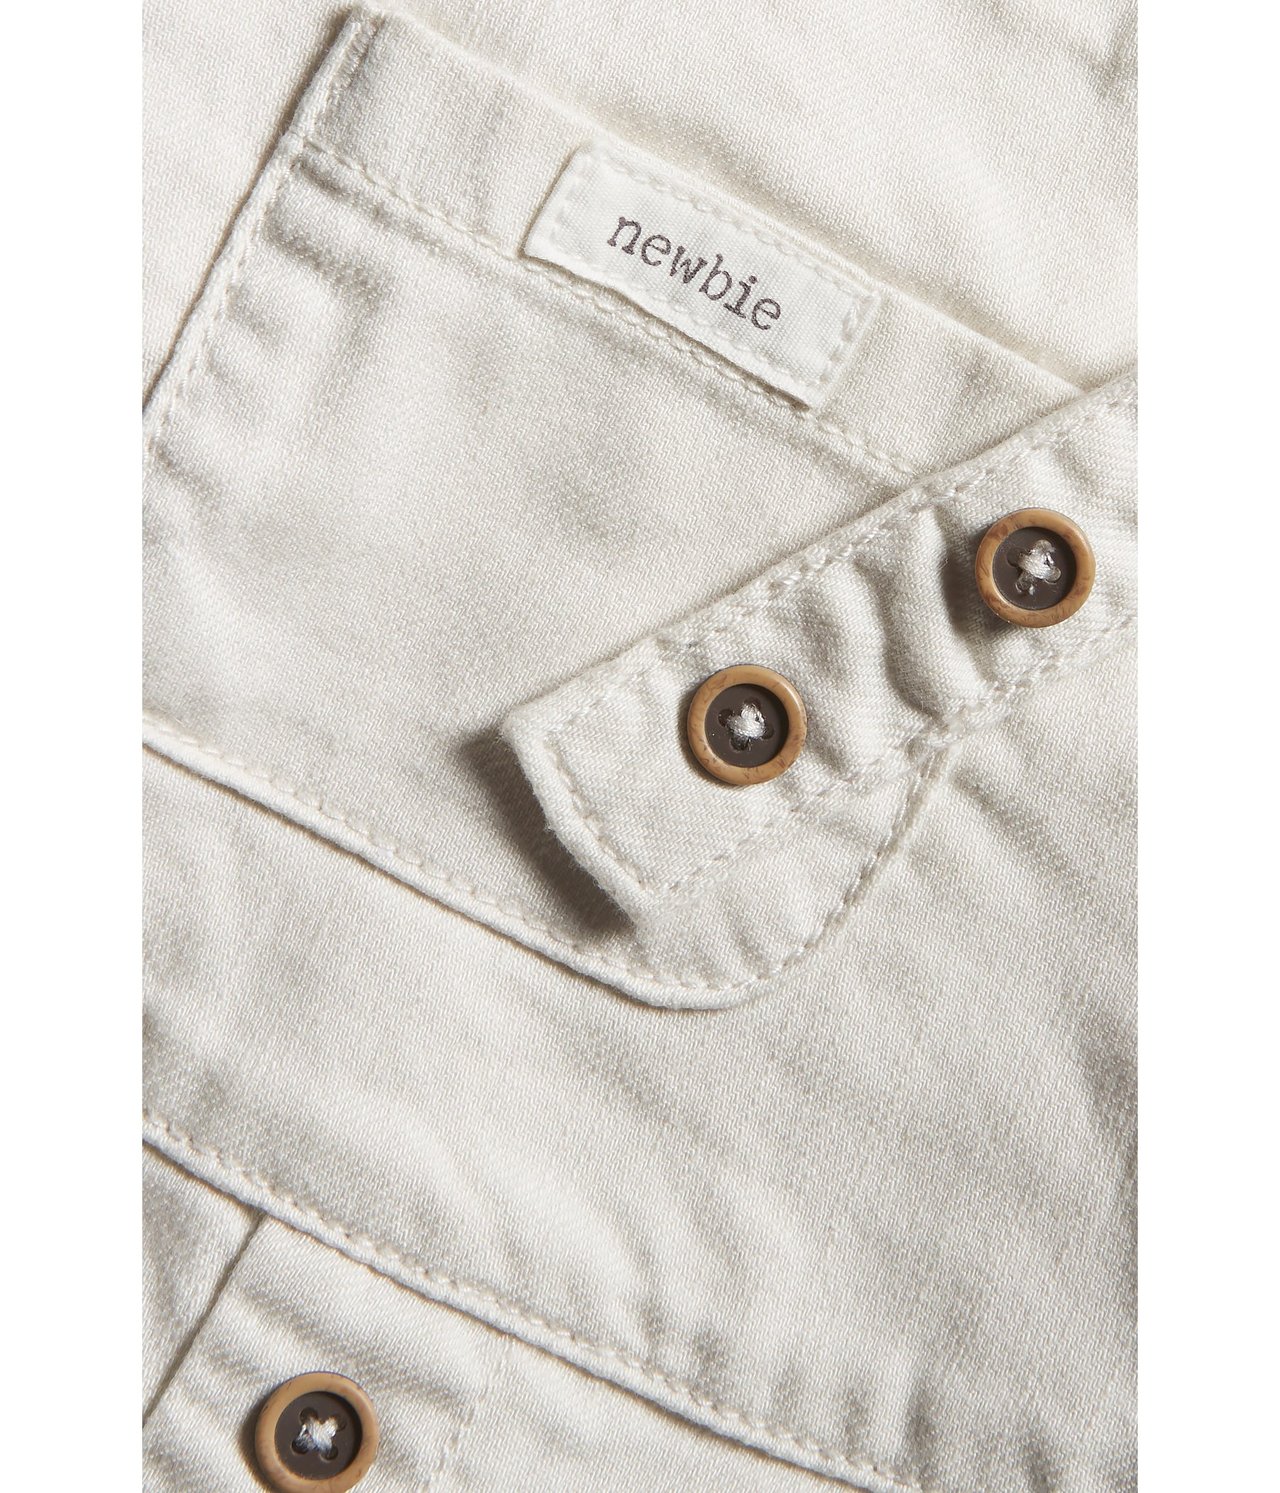 Hängselshorts baby Offwhite - null - 5